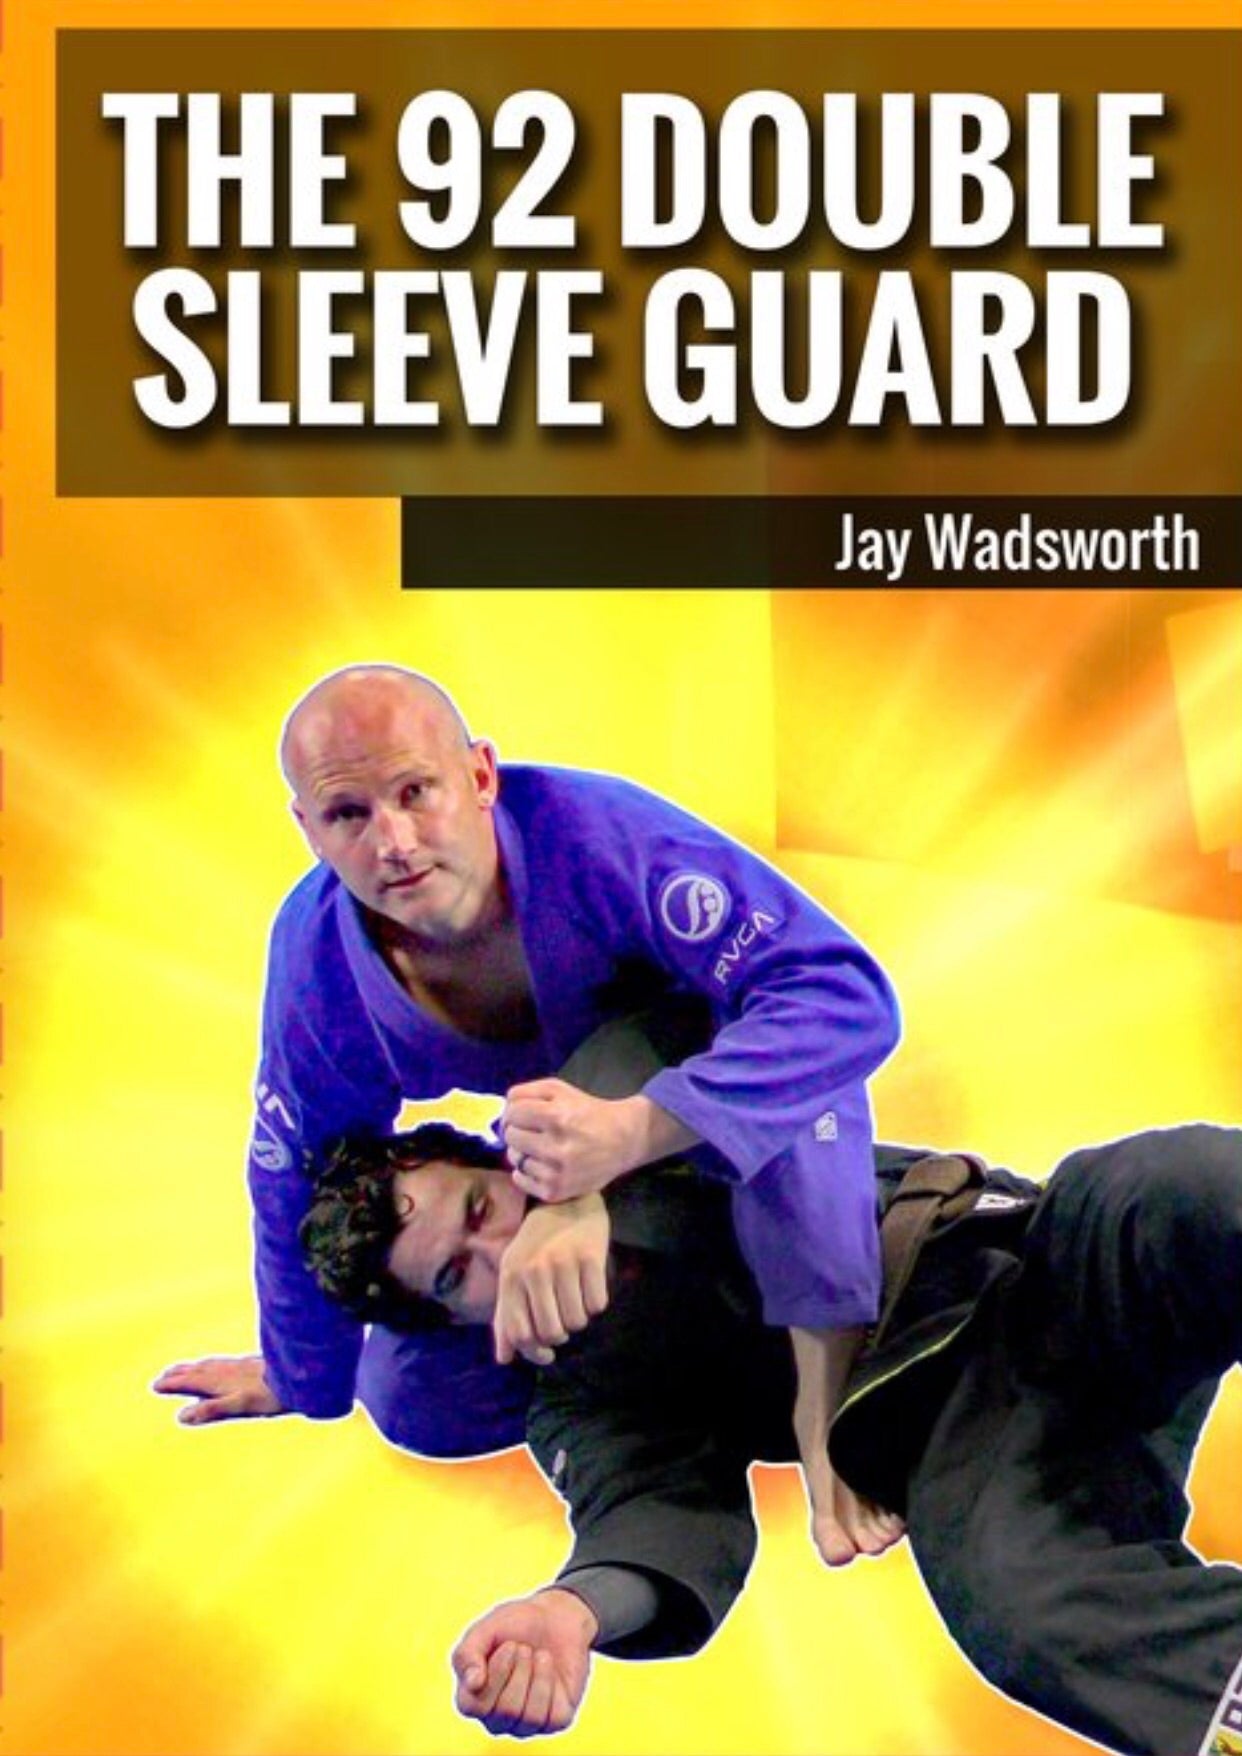 The 92 Double Sleeve Guard 2 DVD Set by Jay Wadsworth - Budovideos Inc